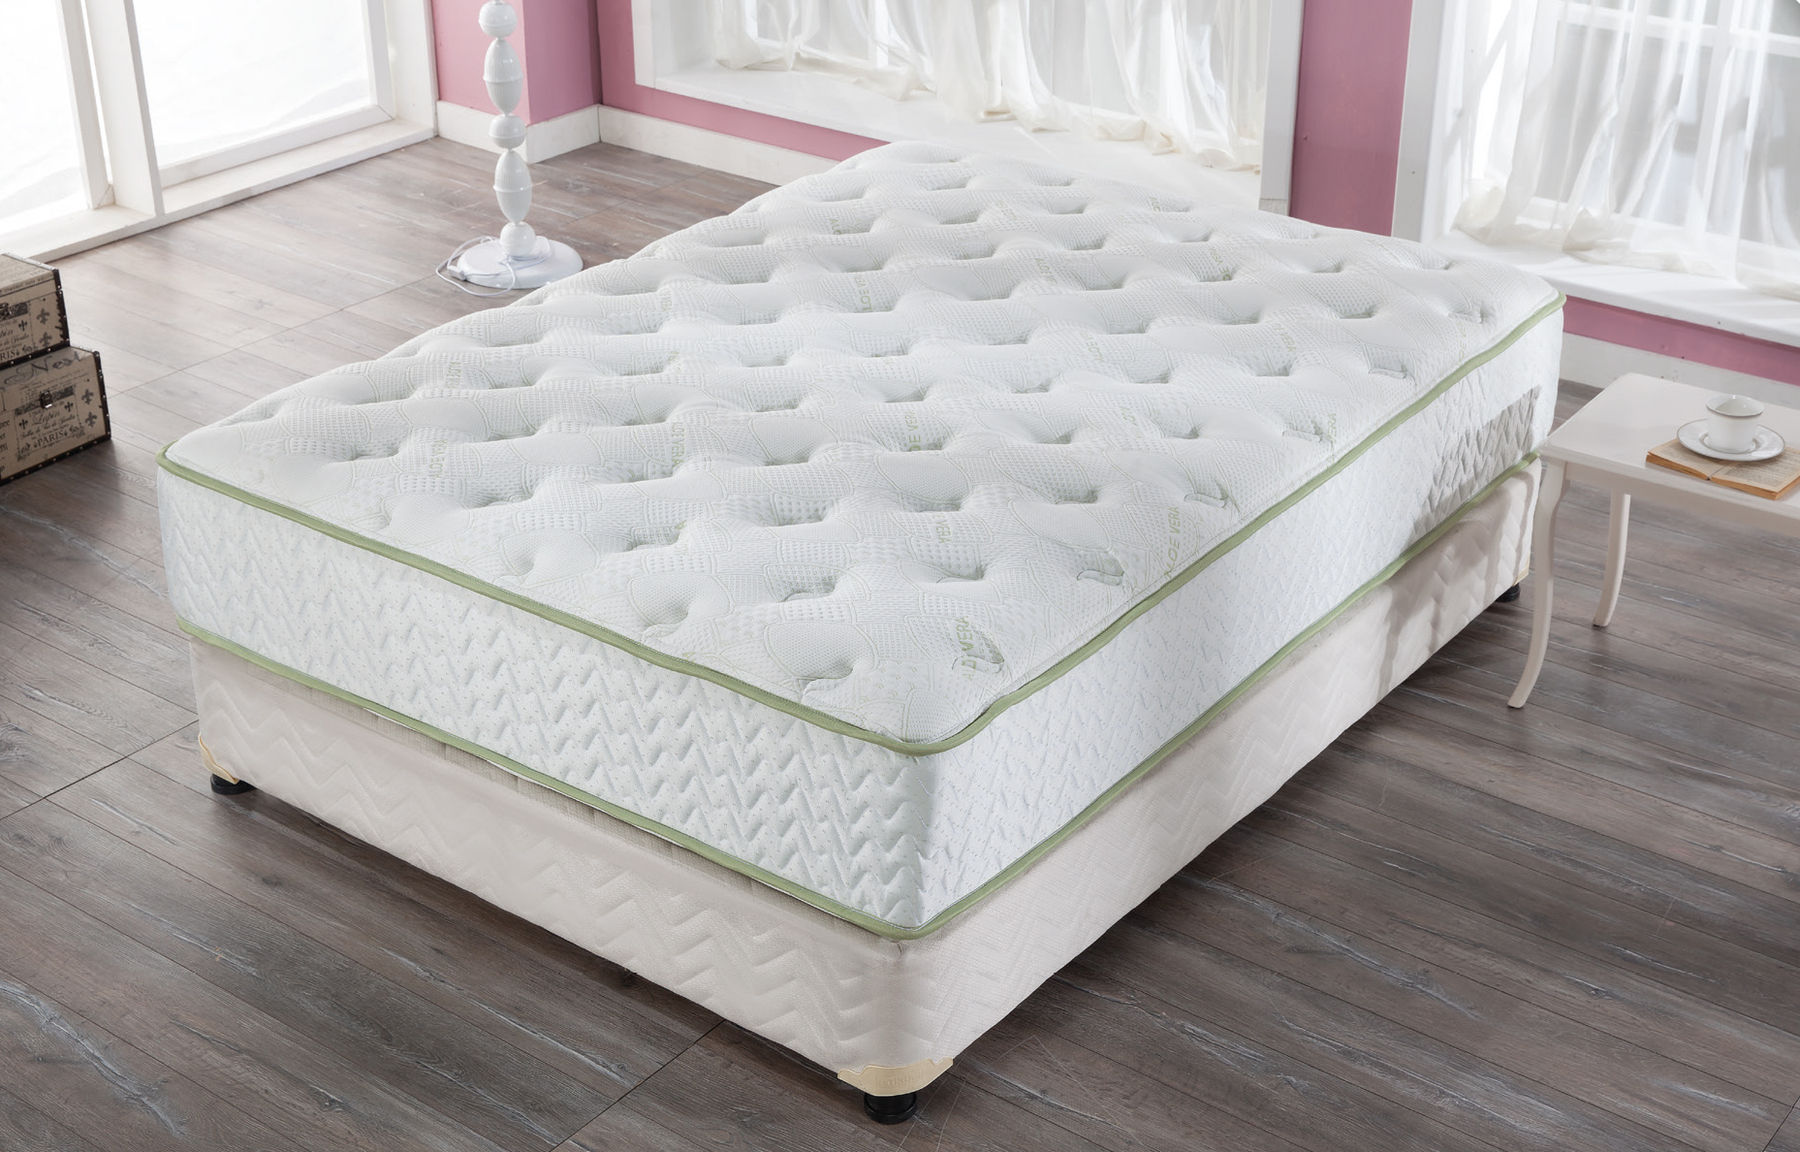 Zinus mattress review: What to know